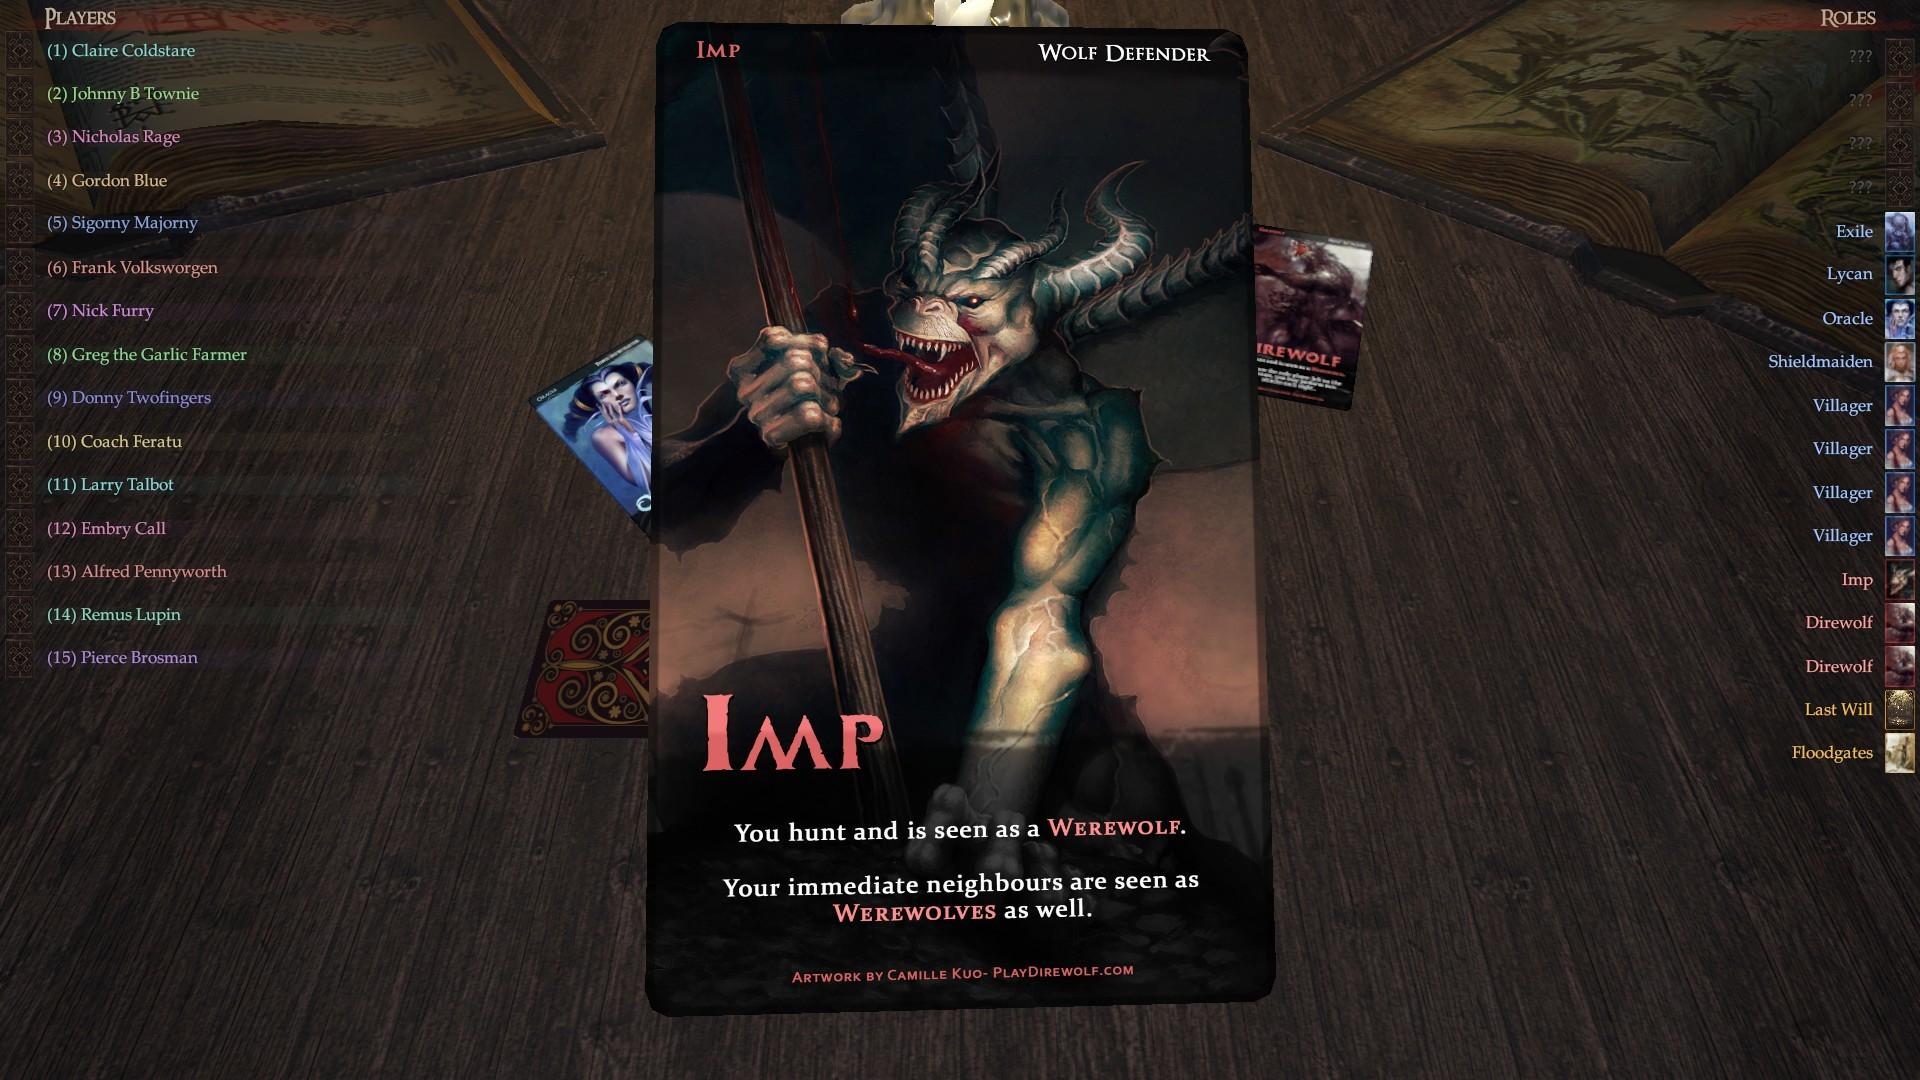 Screenshot №1 from game Wolflord - Werewolf Online